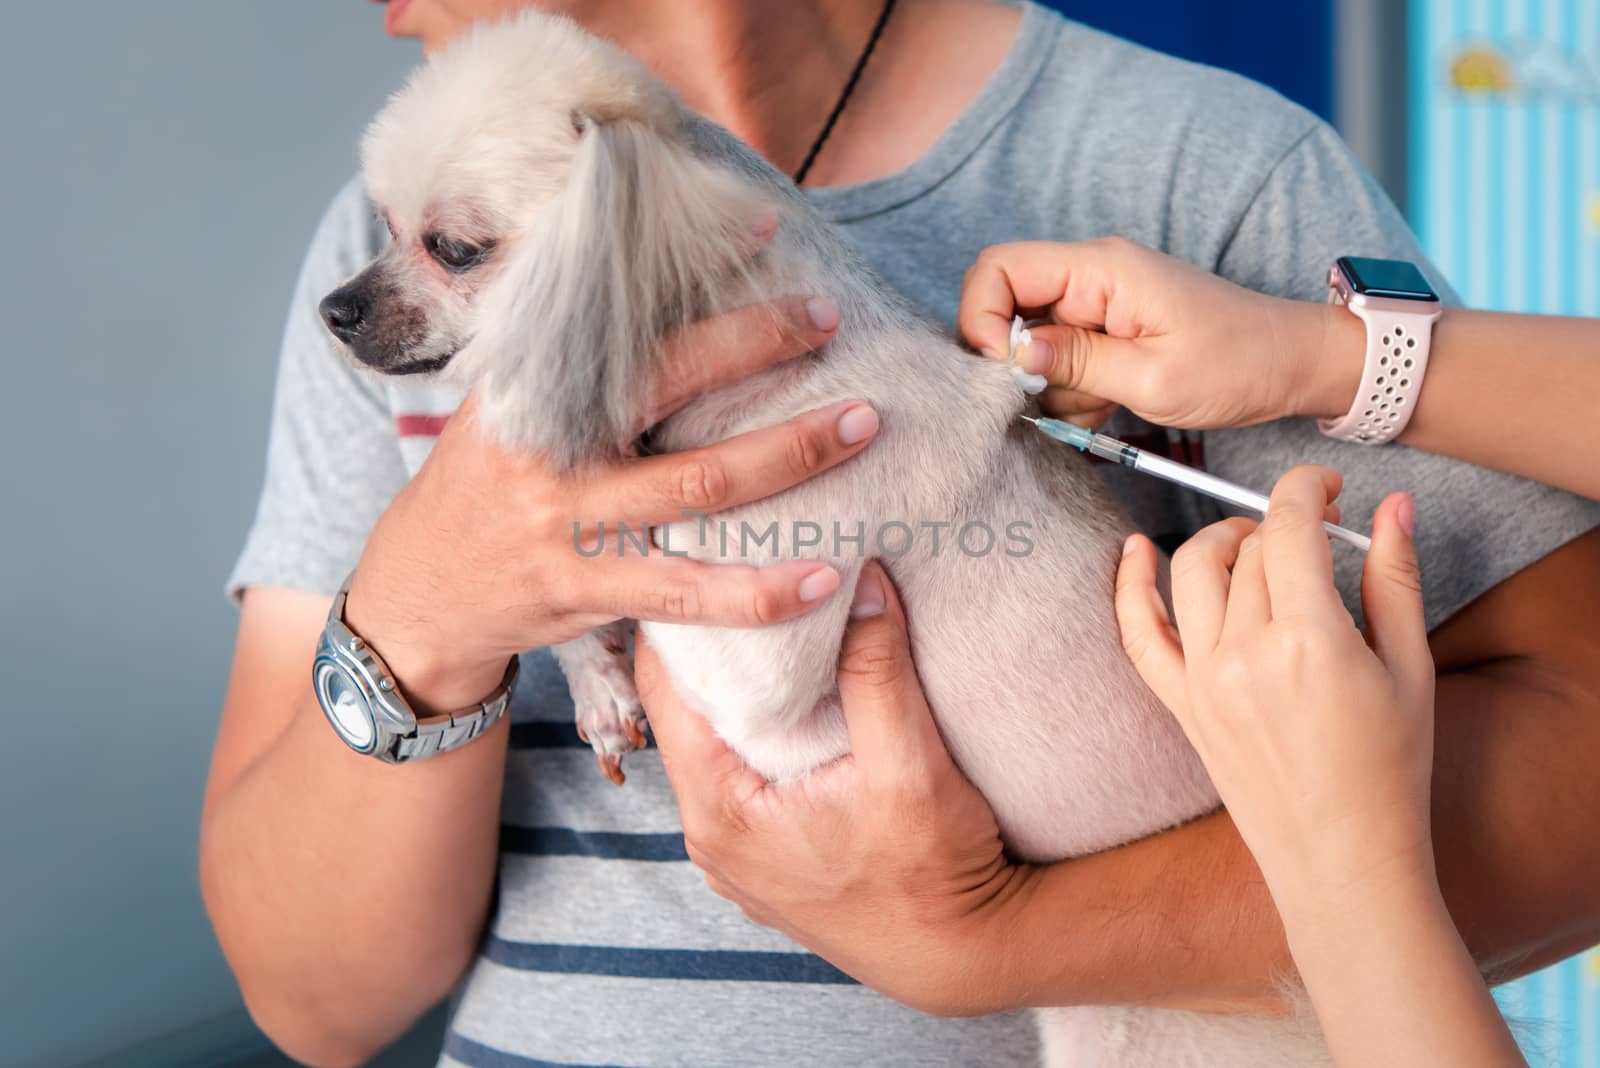 Dog get vaccinated against by veterinarian doctor by PongMoji